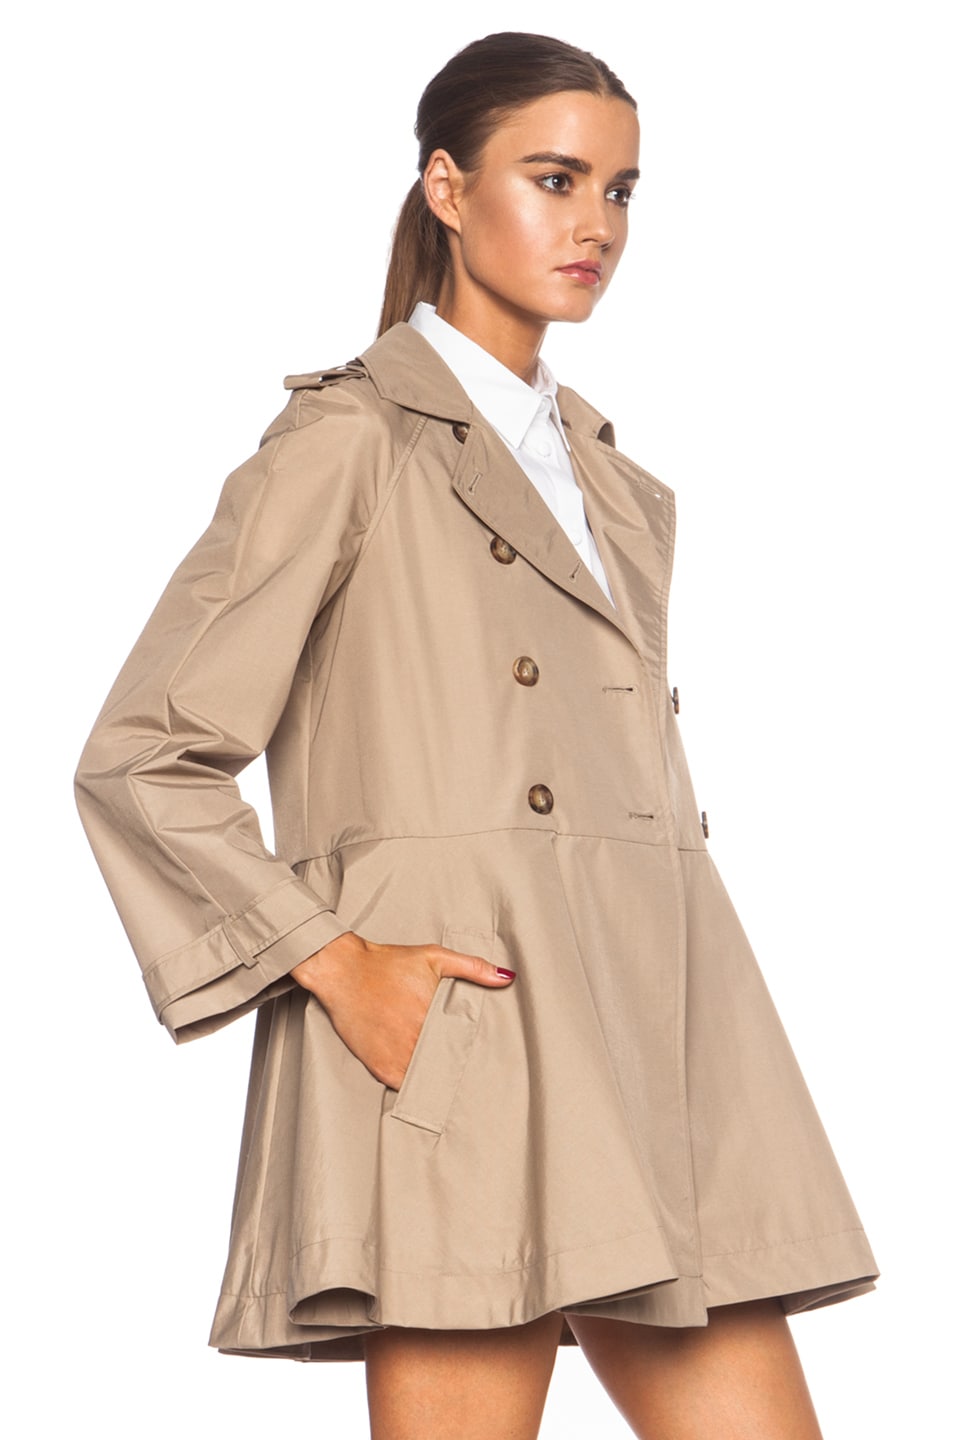 Red Valentino Canvas Polyamide Trench Coat in Dune | FWRD